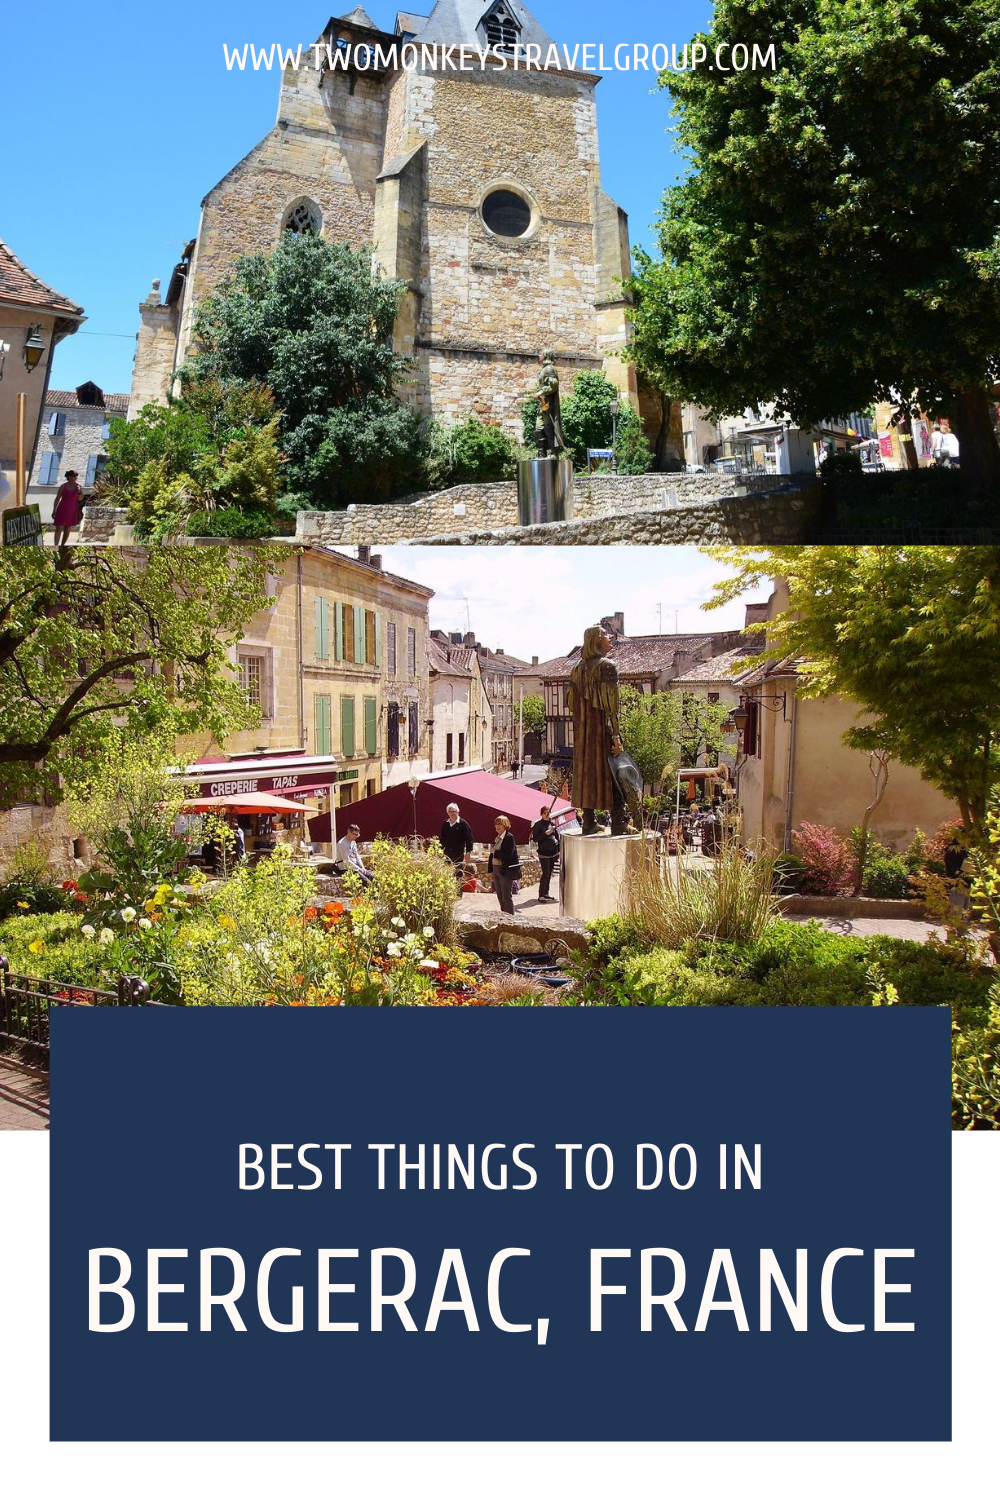 15 Best Things To Do in Bergerac, France [With Suggested Tours]